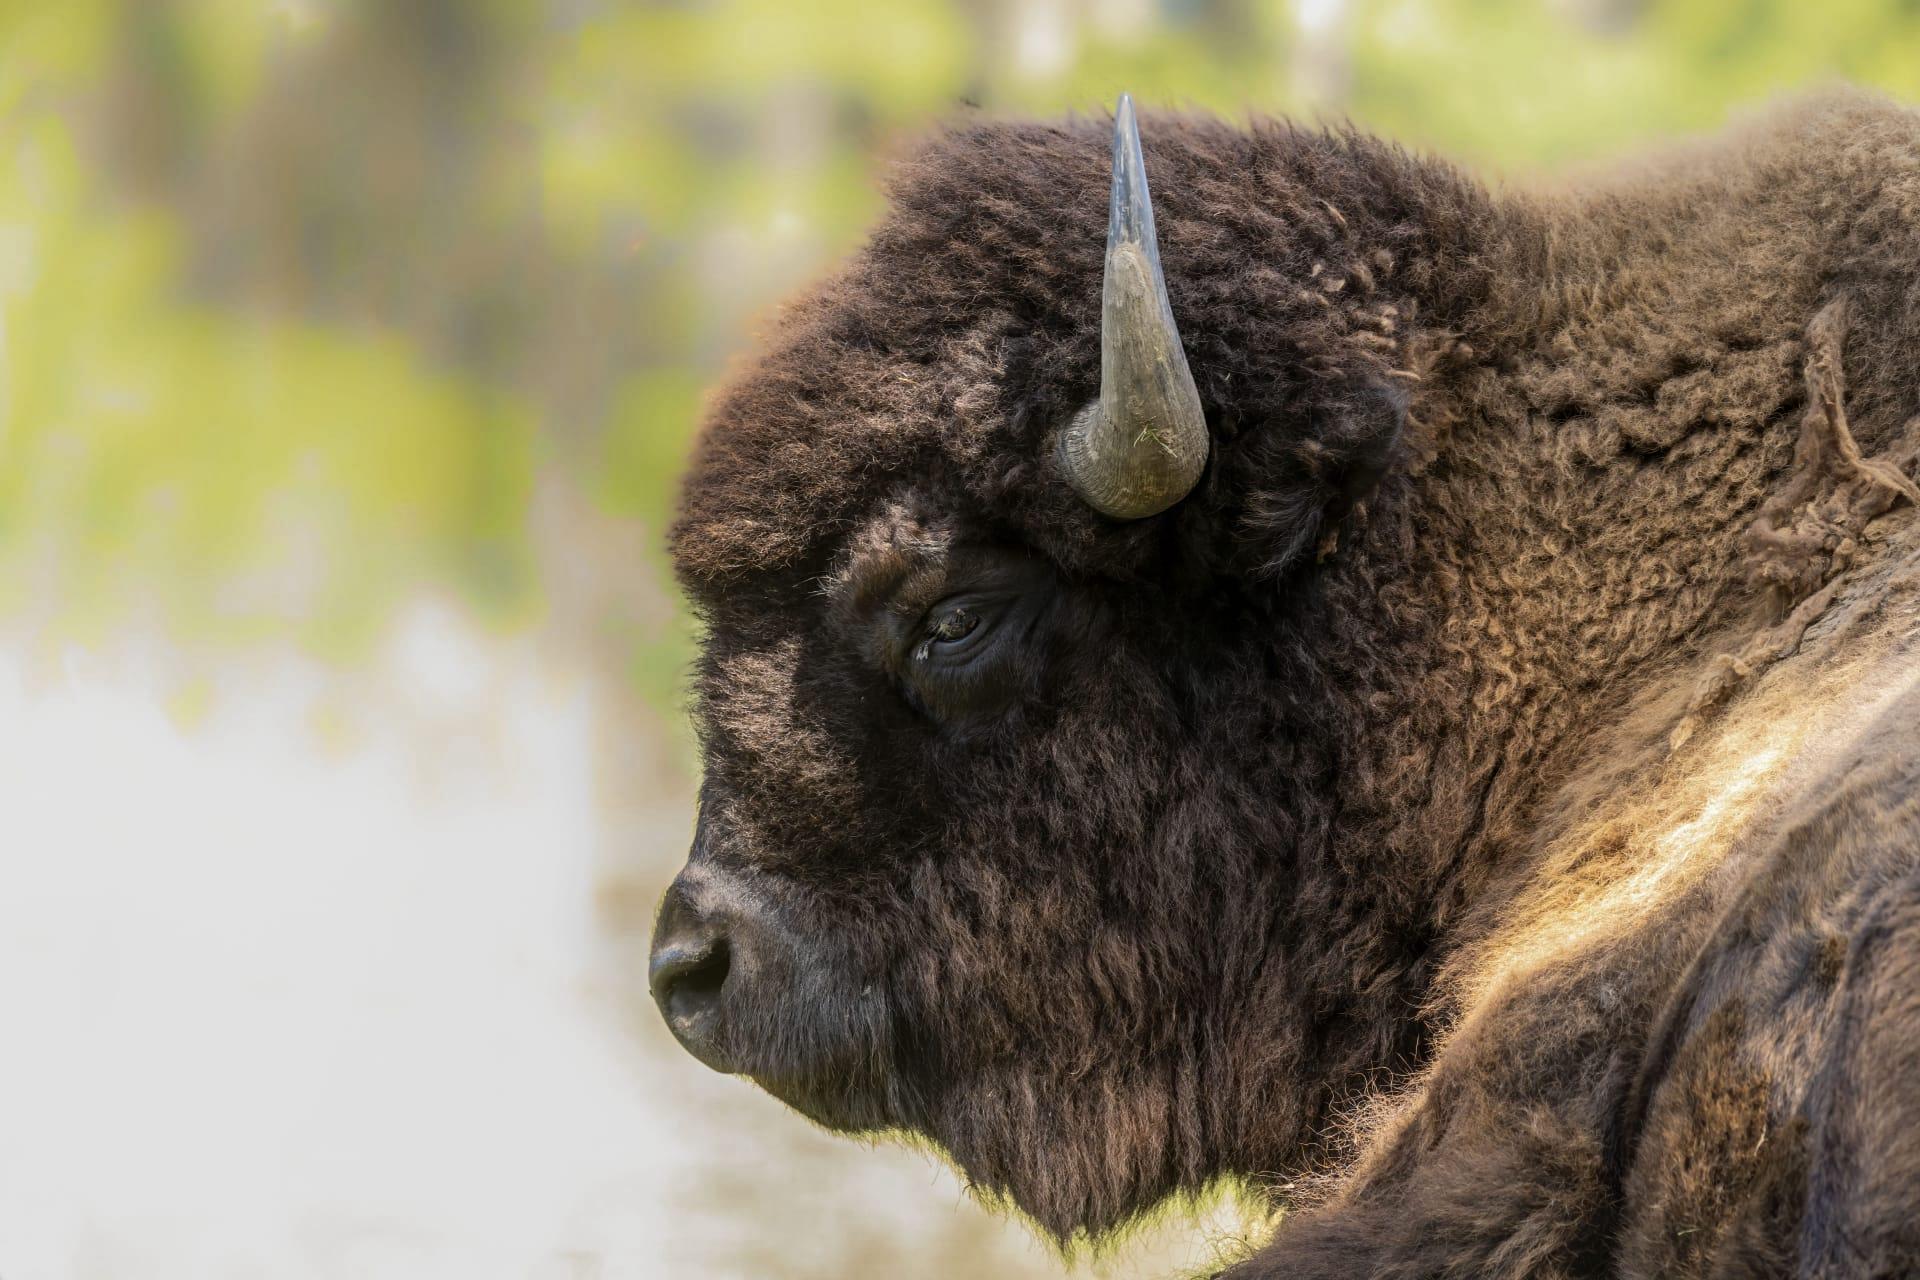 American bison pictures